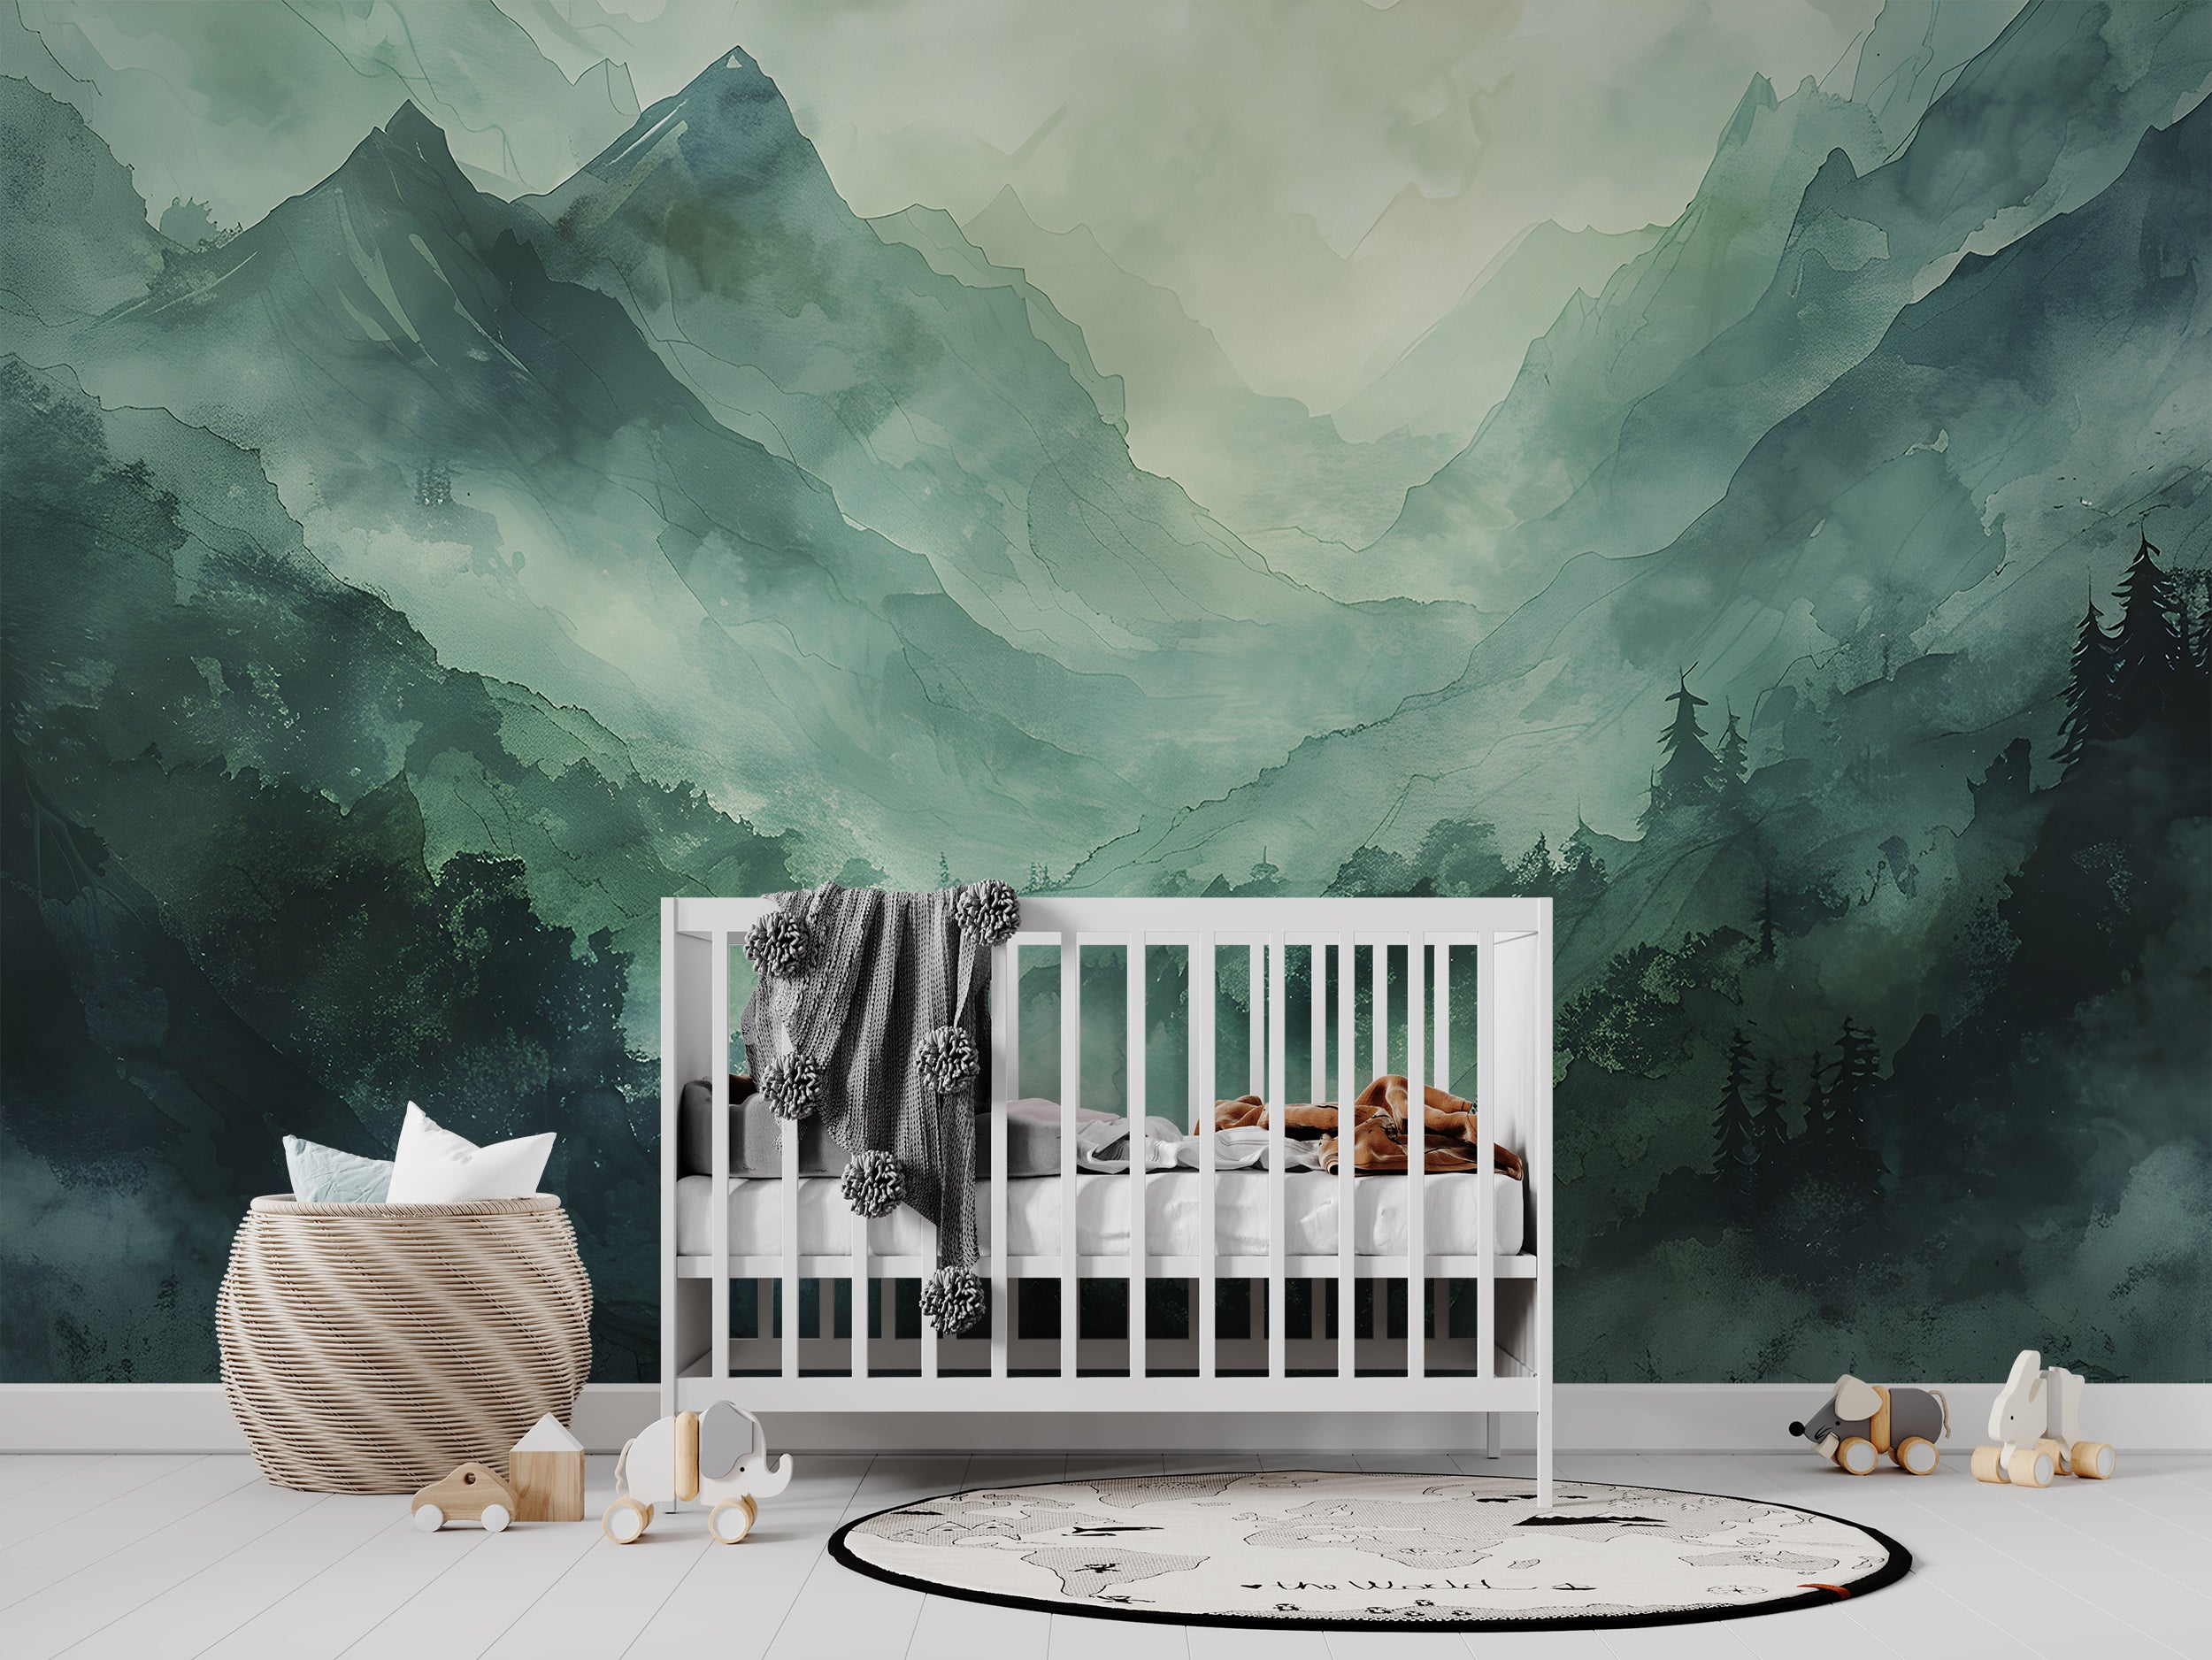 Watercolor Green Mountains Mural, Abstract Mountain Landscape Wallpaper, Peel and Stick Foggy Forest Art, Emerald Color Wild Nature Decor